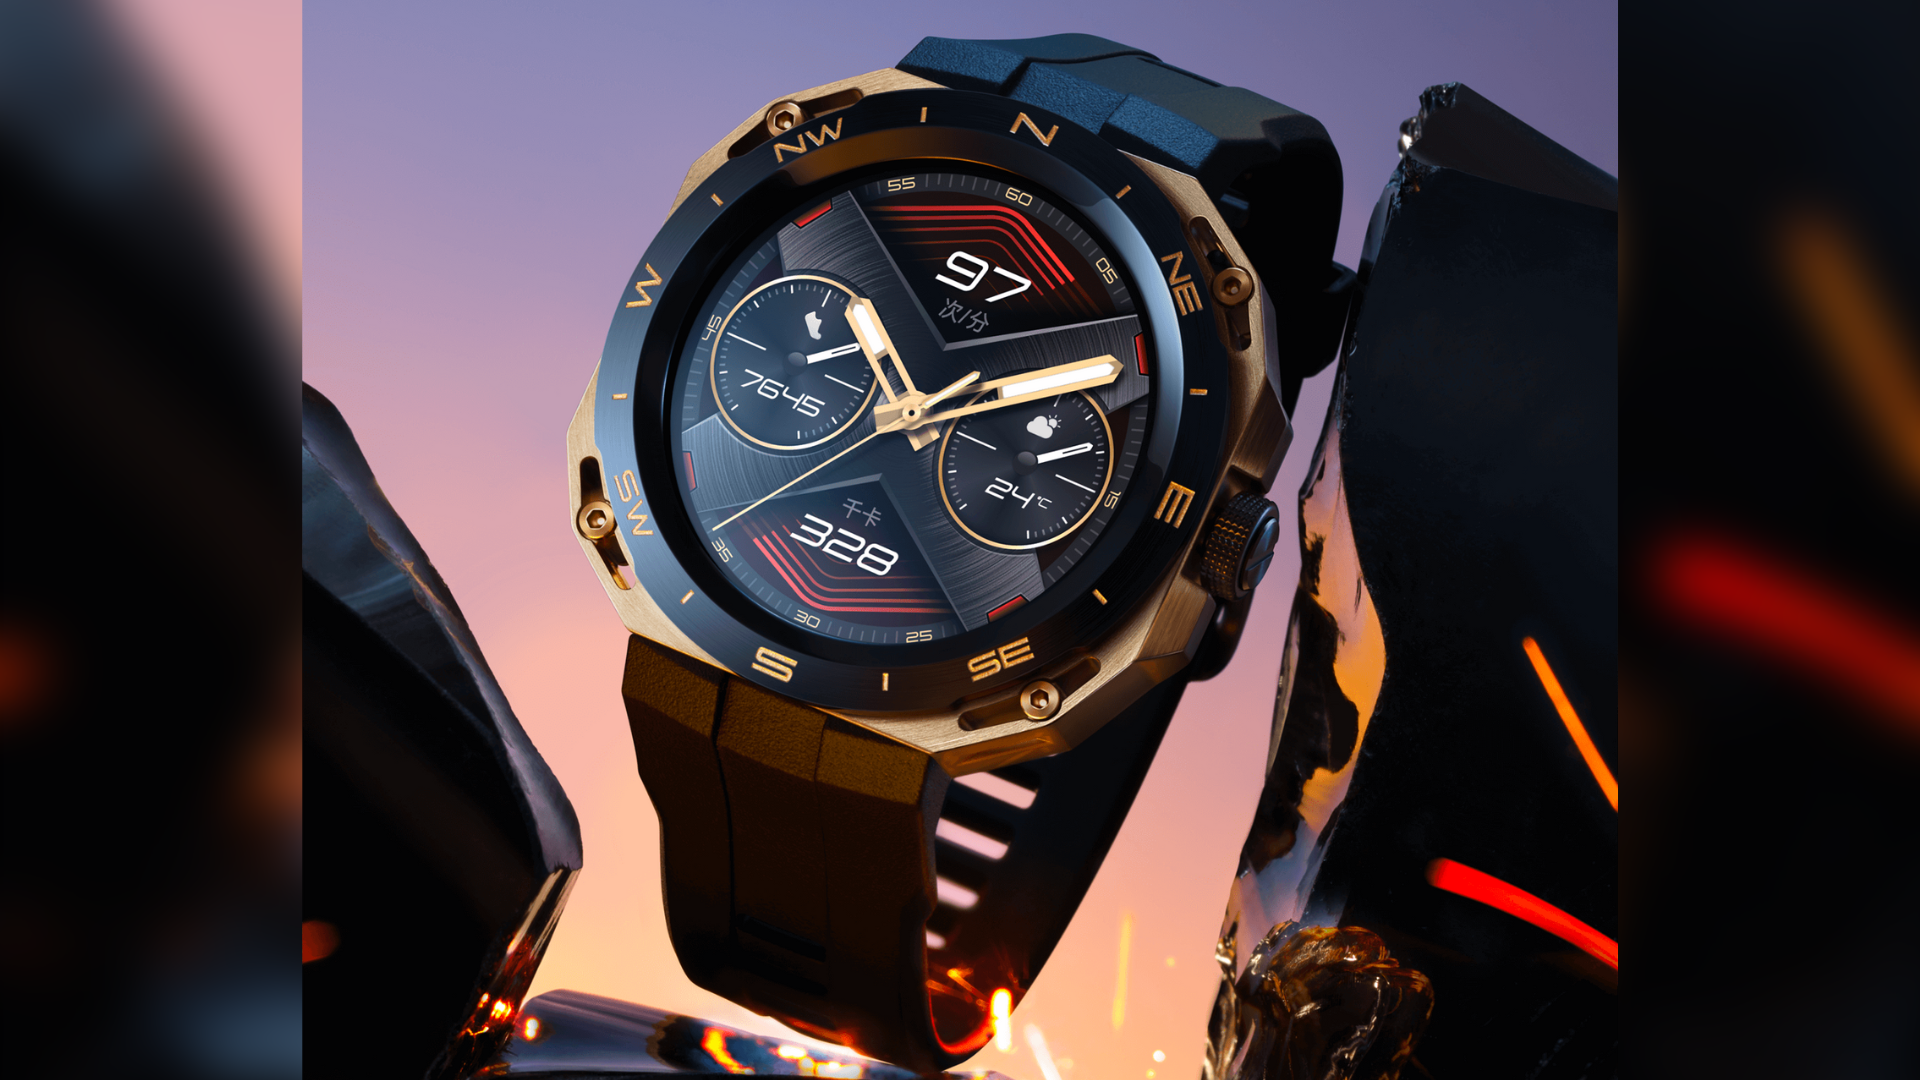 HUAWEI Watch GT Cyber smartwatch comes with an innovative 